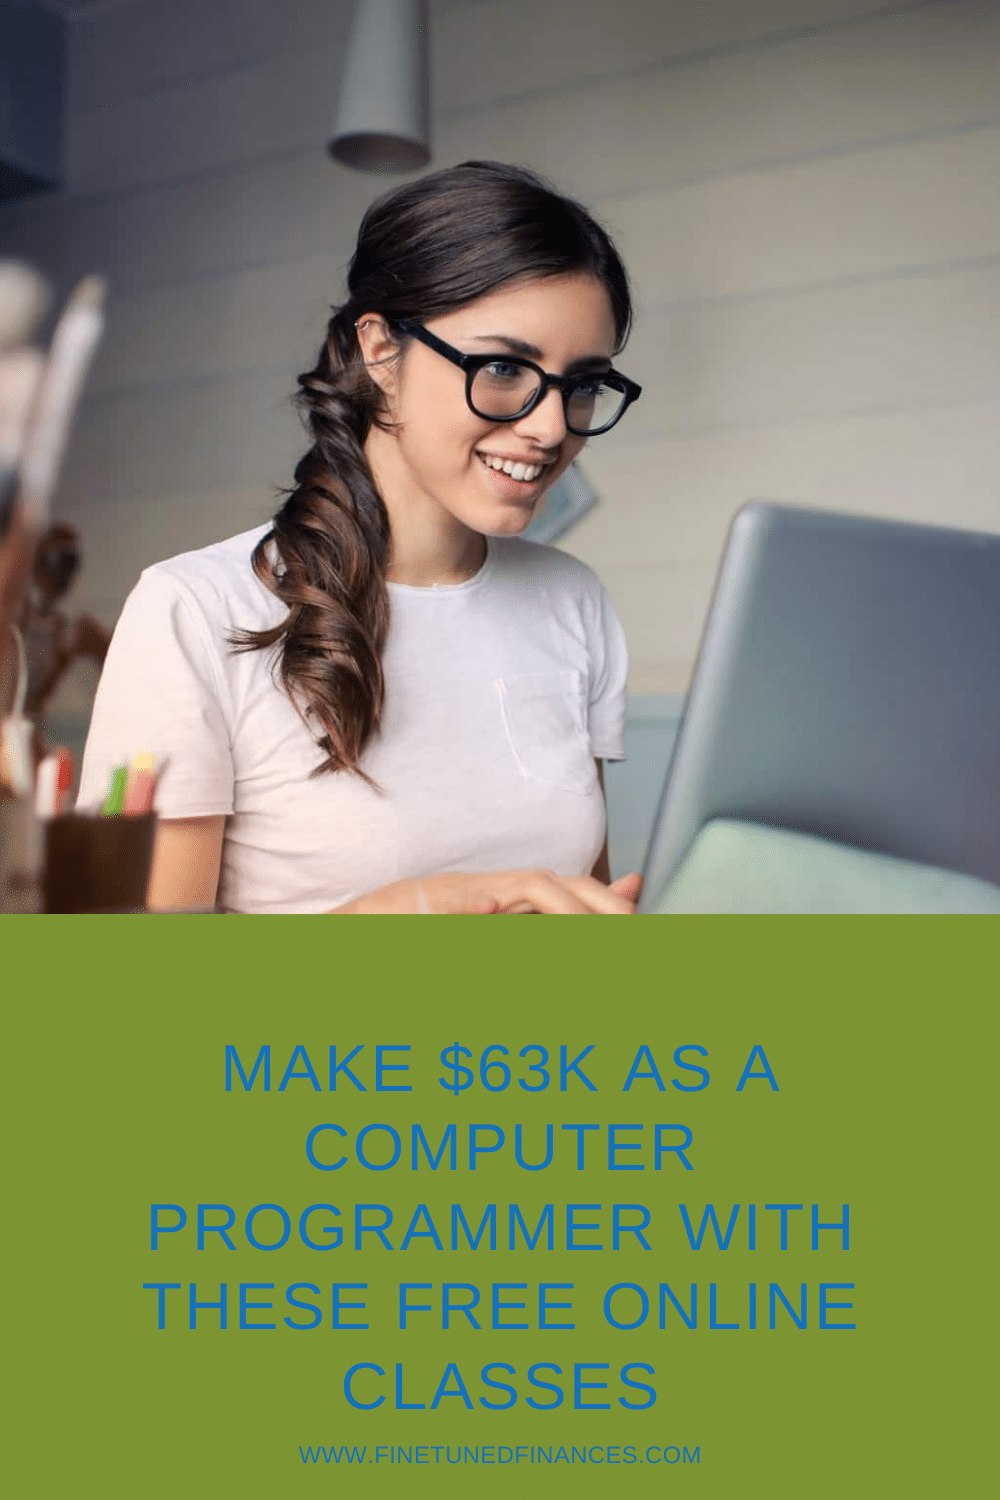 Make $63K As a Computer Programmer With These FREE Online Classes